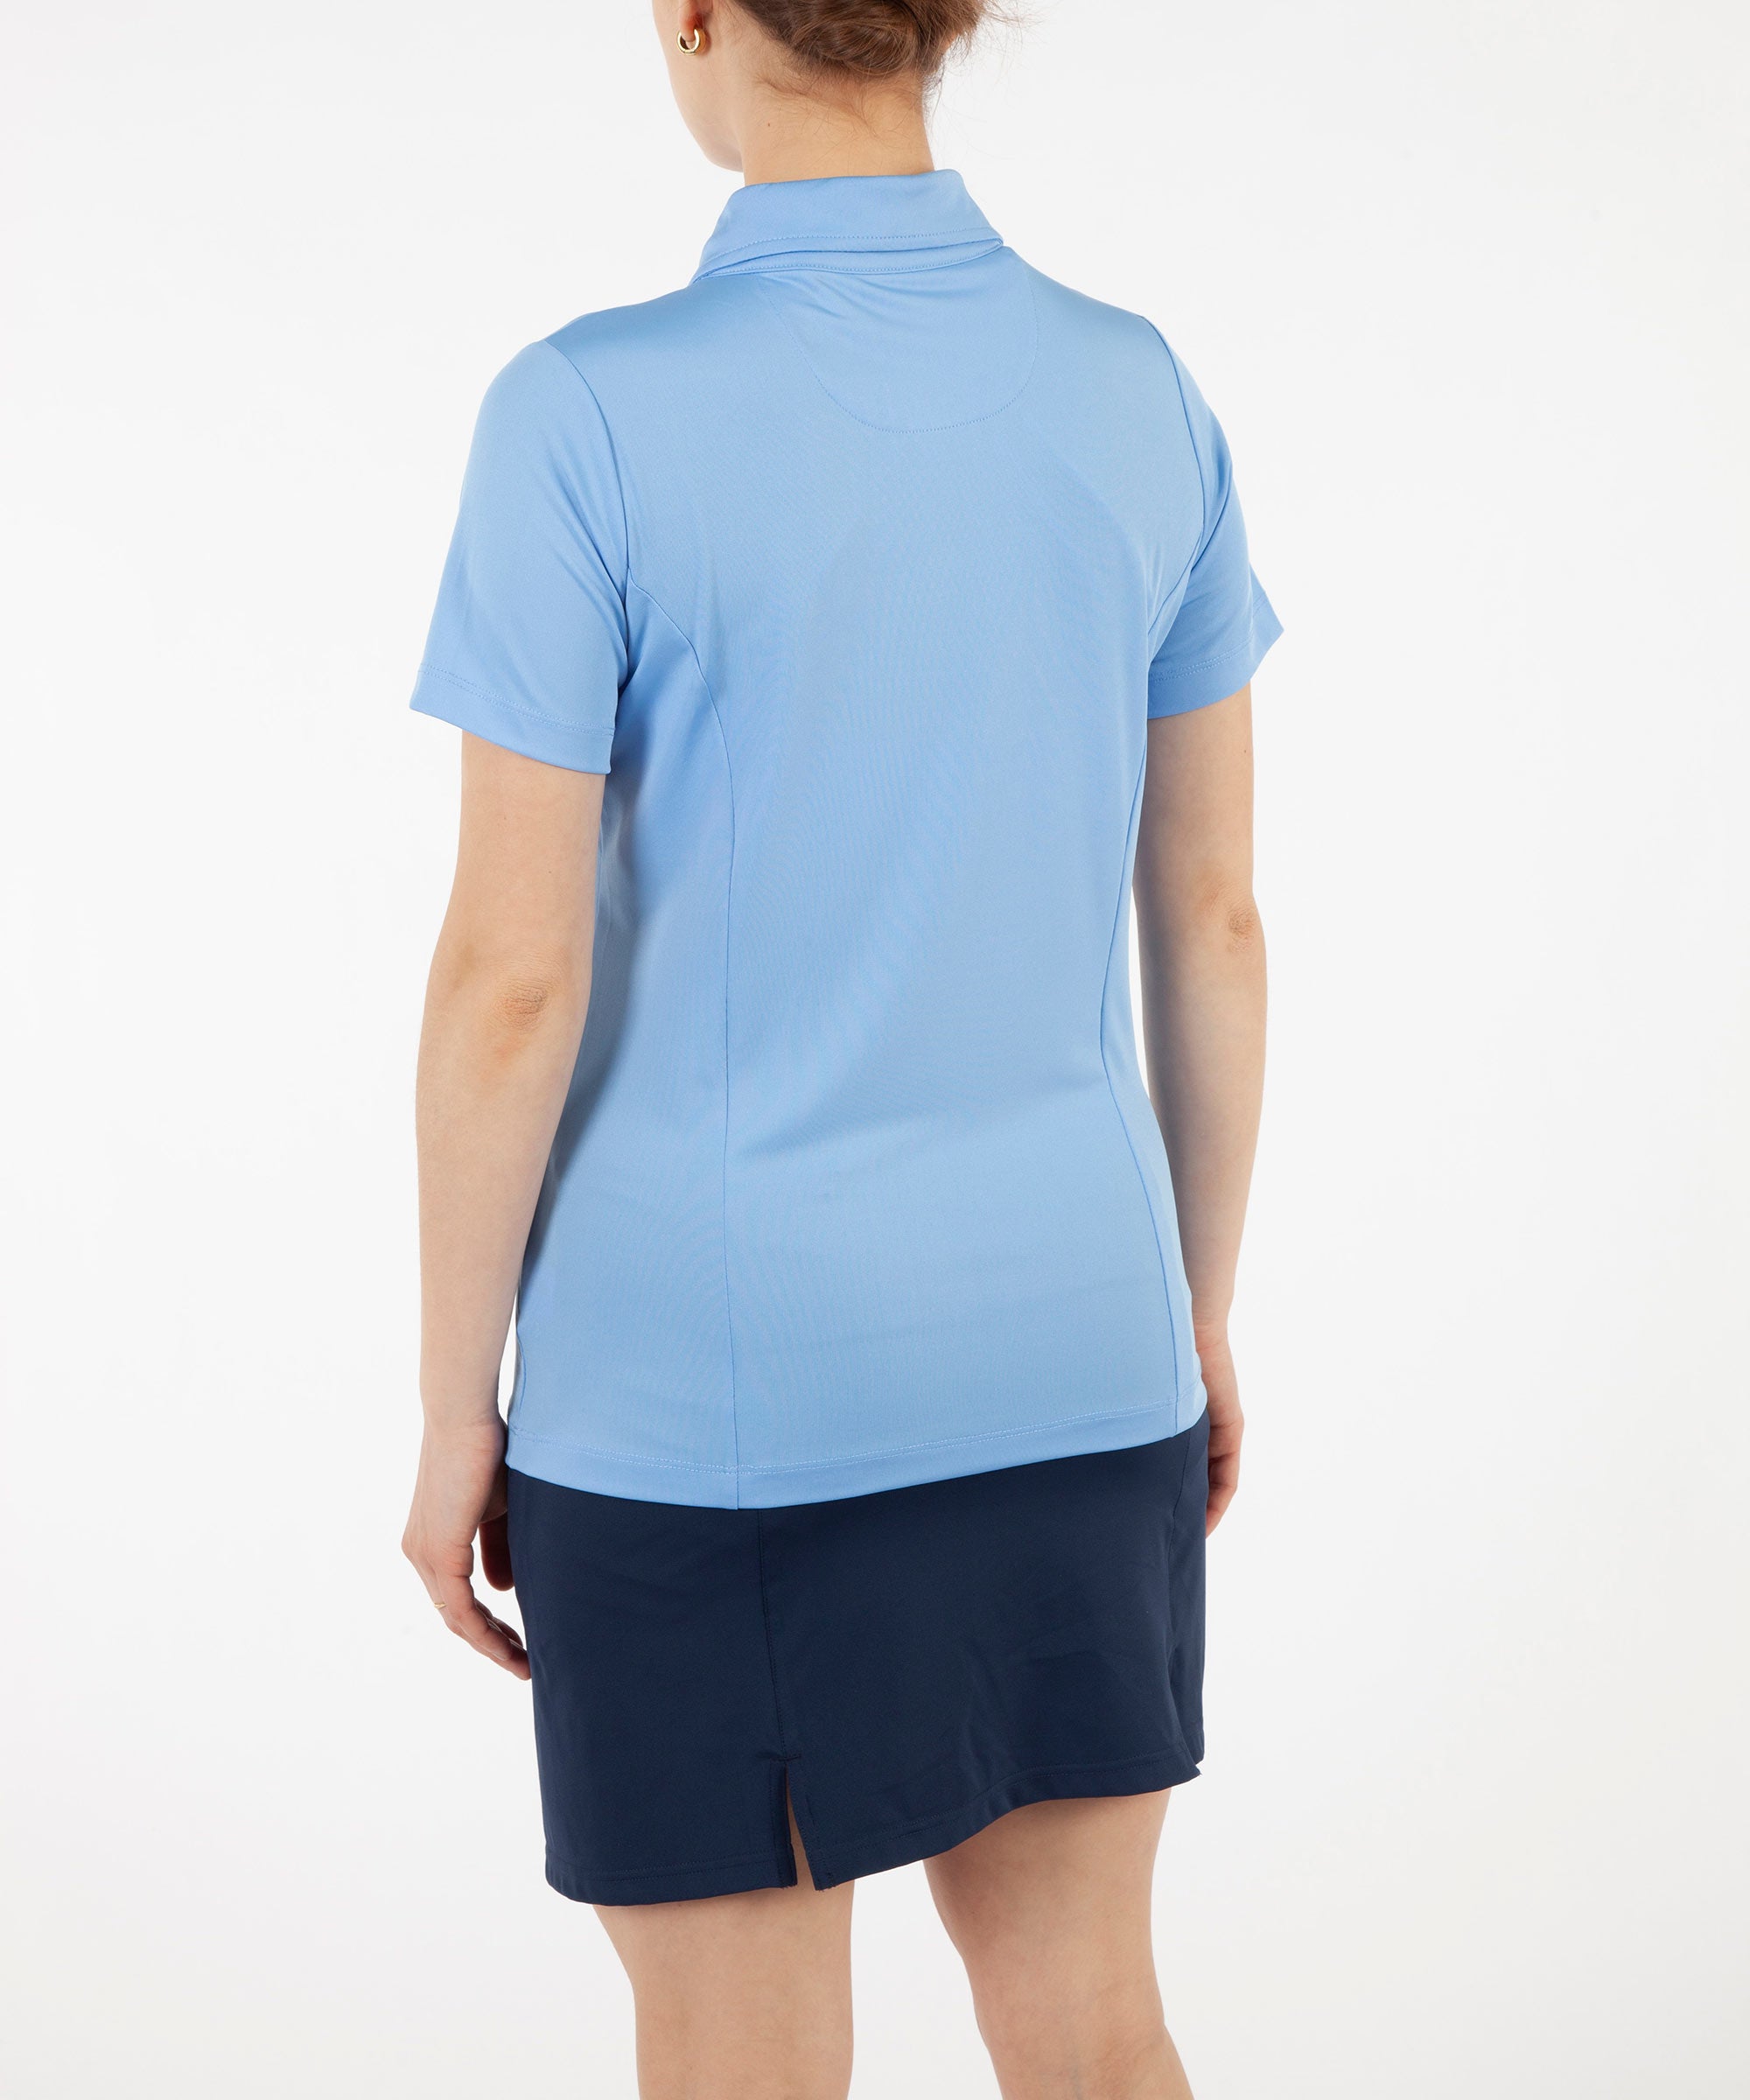 Women's Taylor Performance Solid Polo Shirt